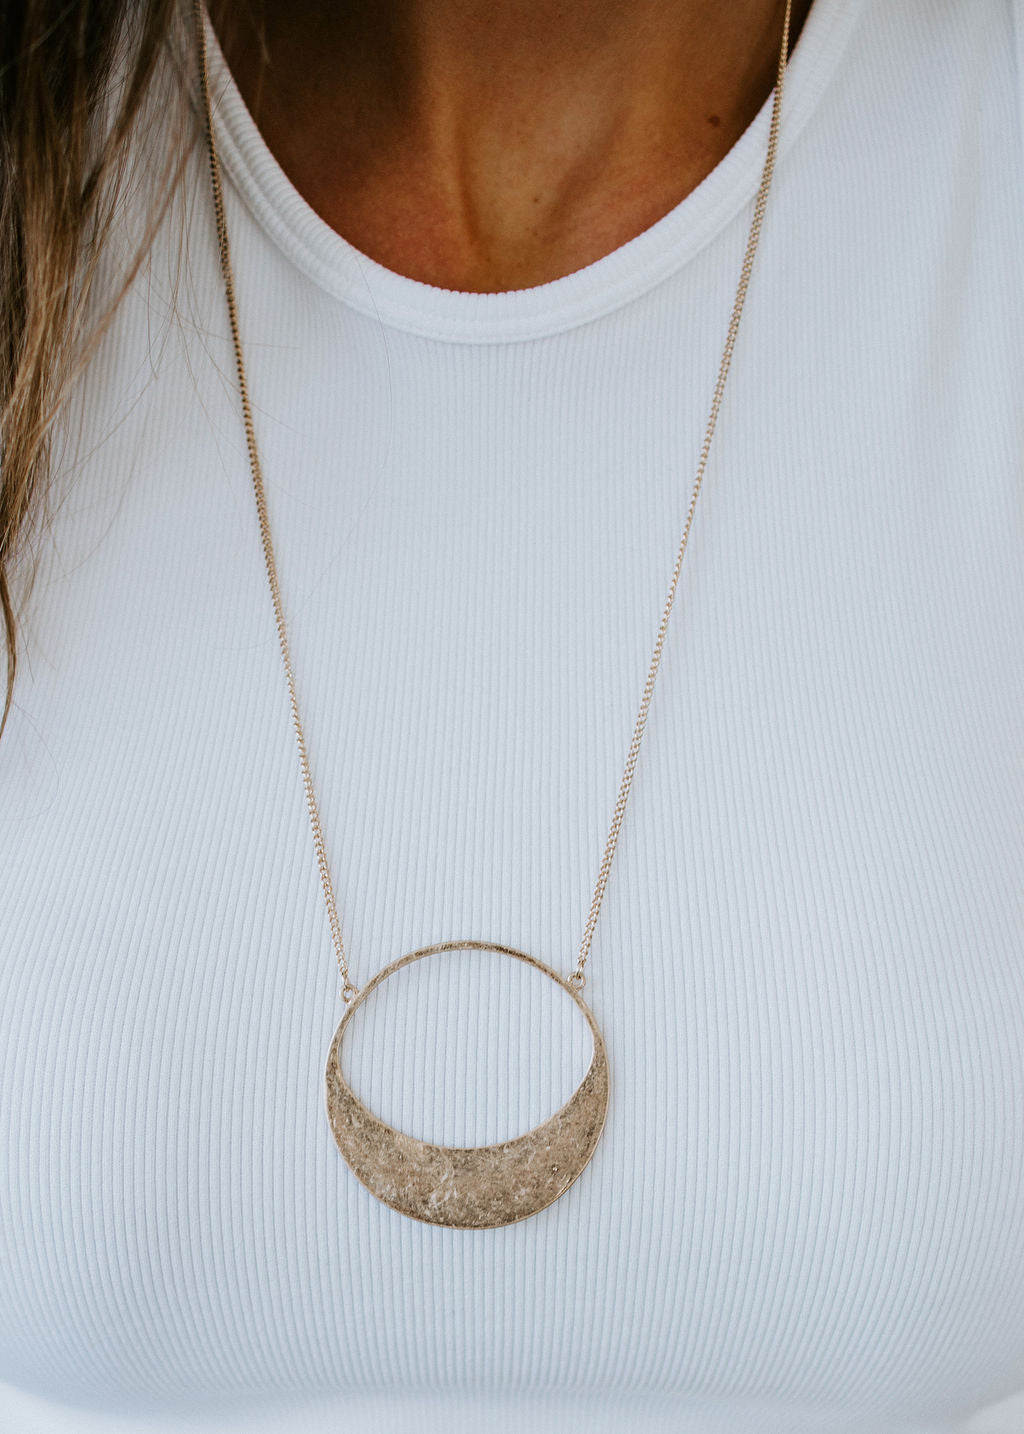 image of Augusta Circle Pendant Necklace